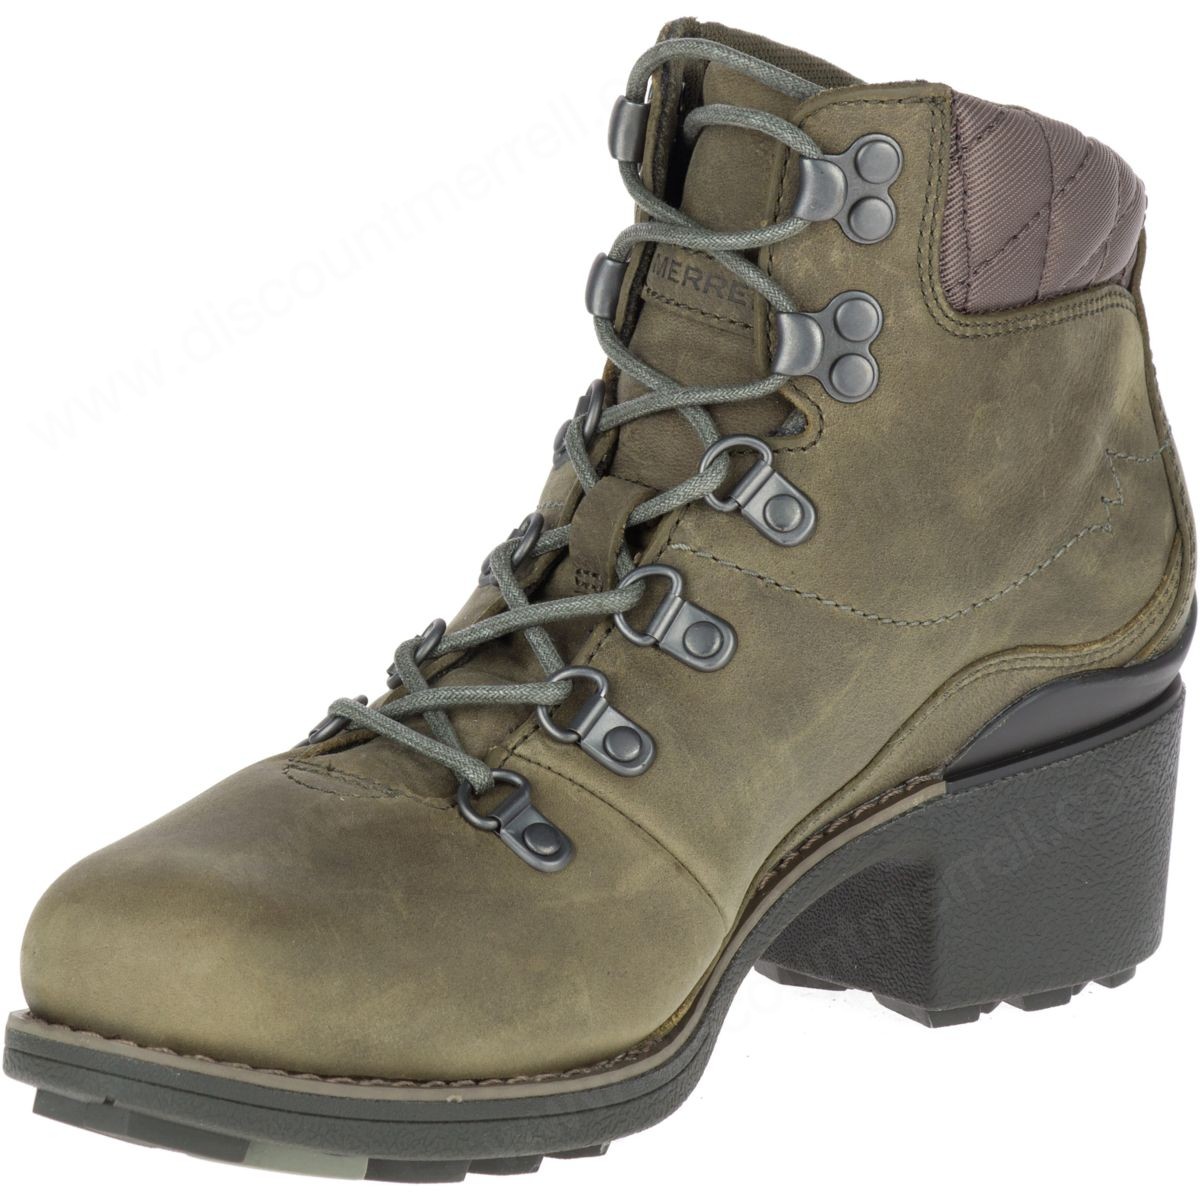 Merrell Woman's Chateau Mid Lace Waterproof Dusty Olive - -5